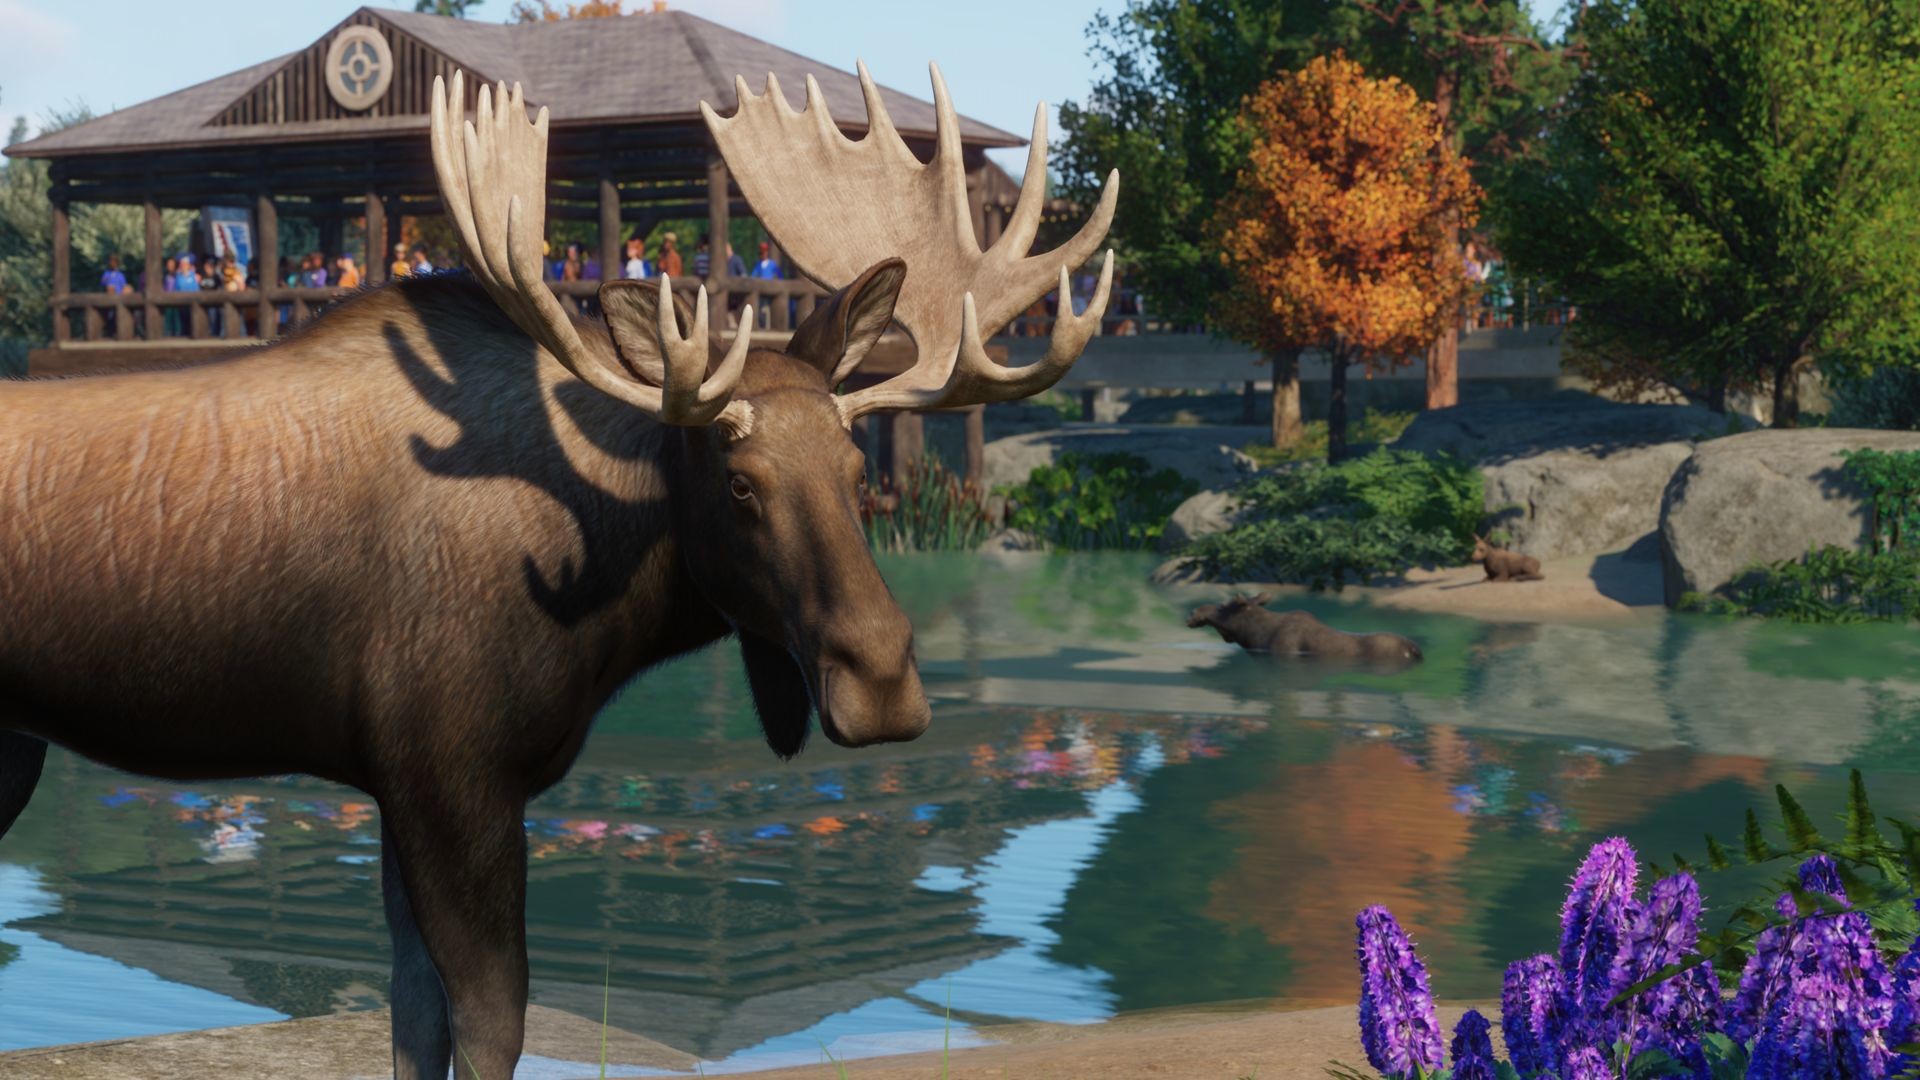 Planet Zoo - North America Animal Pack DLC Steam Altergift